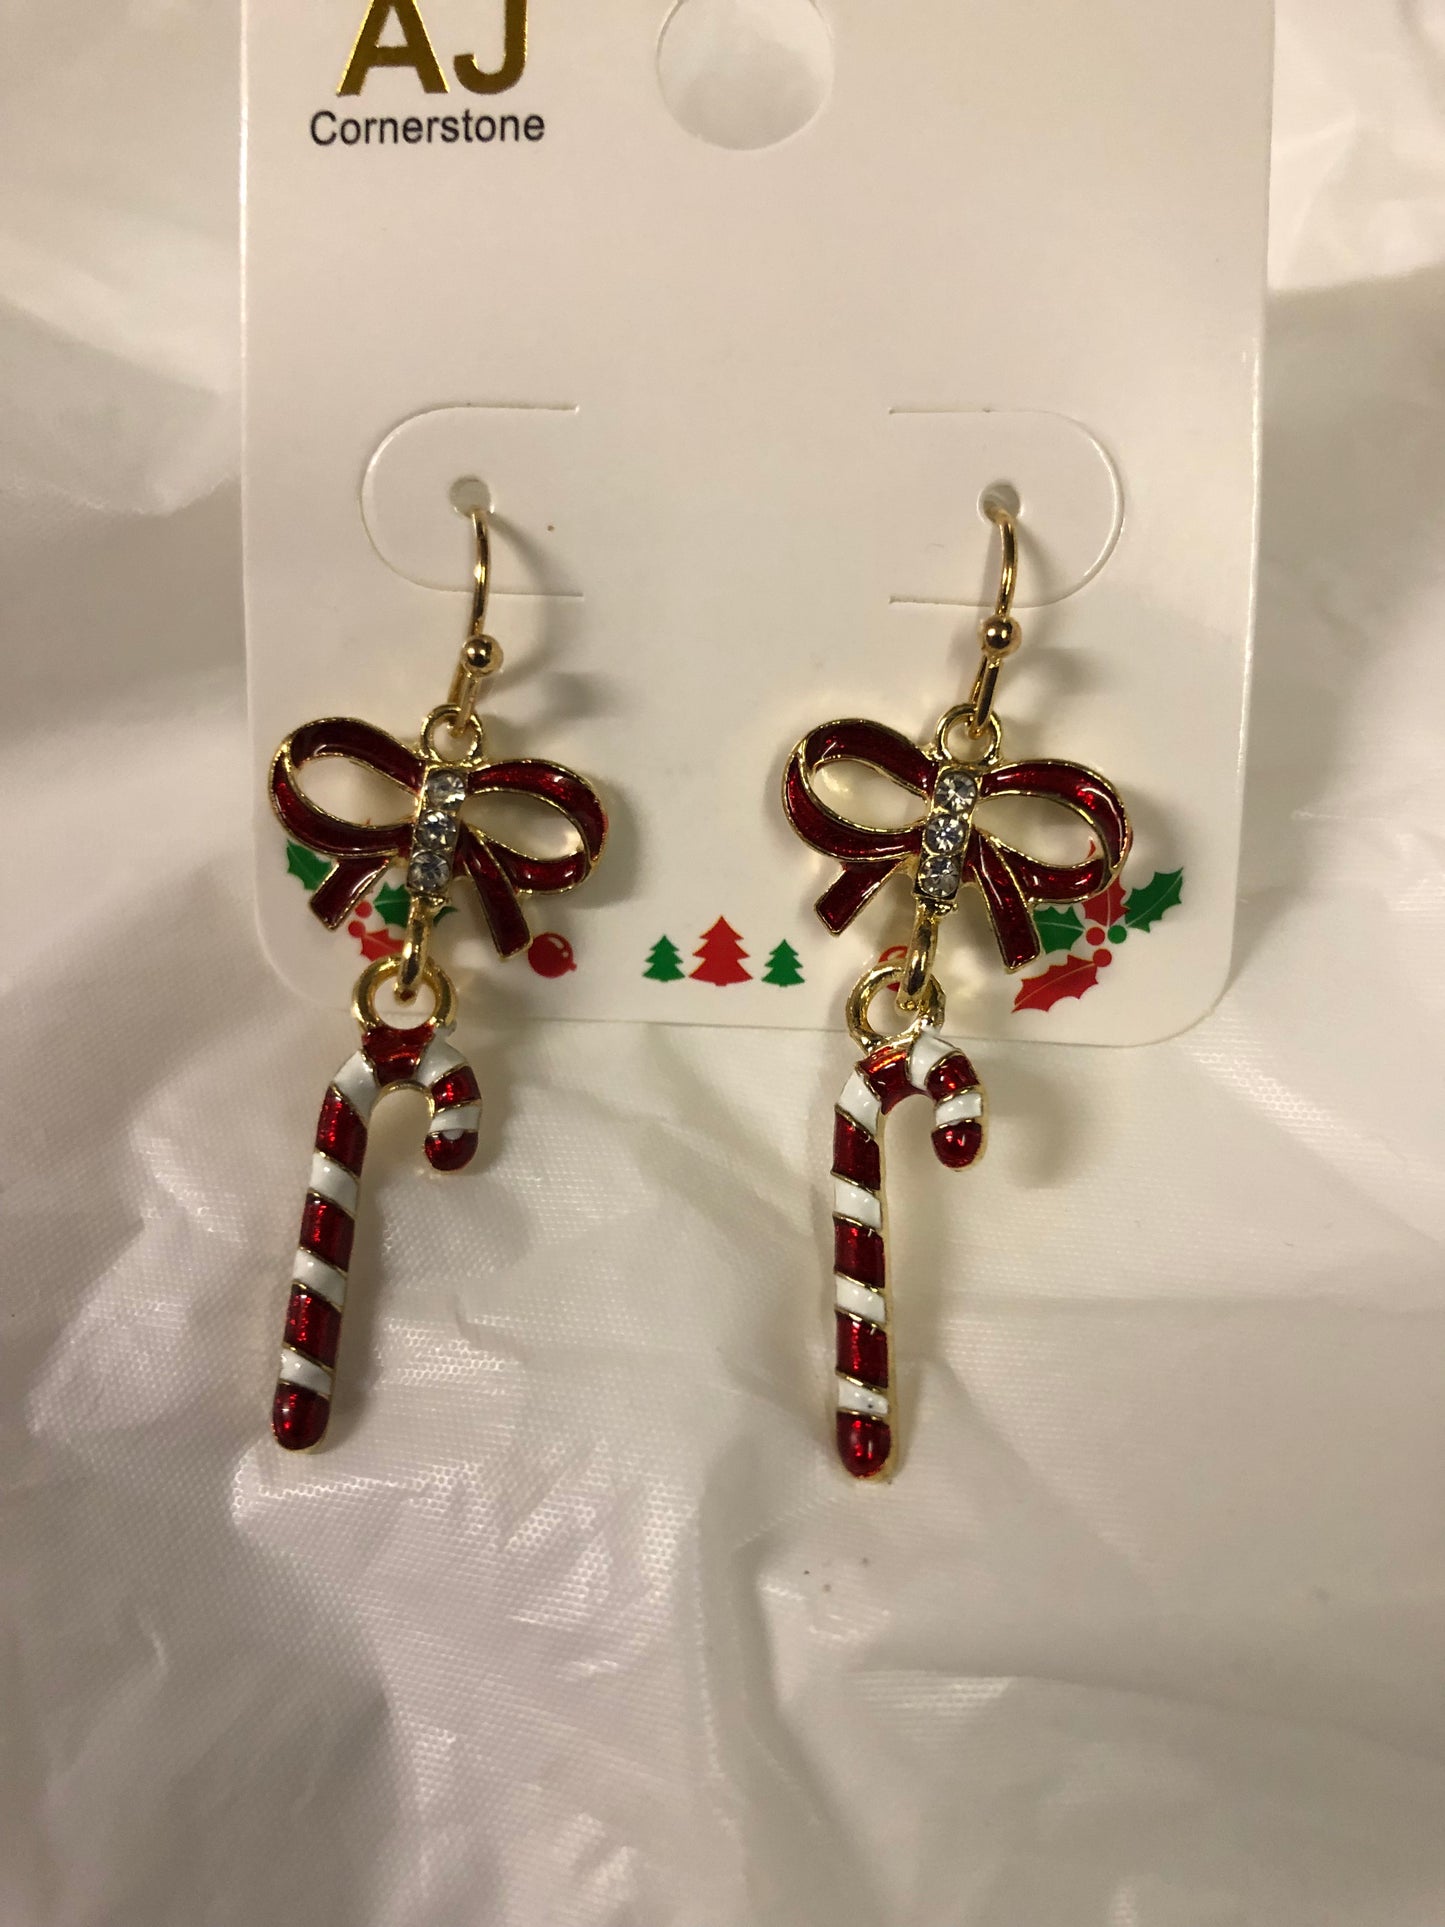 Woman Fashion Thin Candy Cane Christmas Earrings wITH a Bow. "New Arrival"